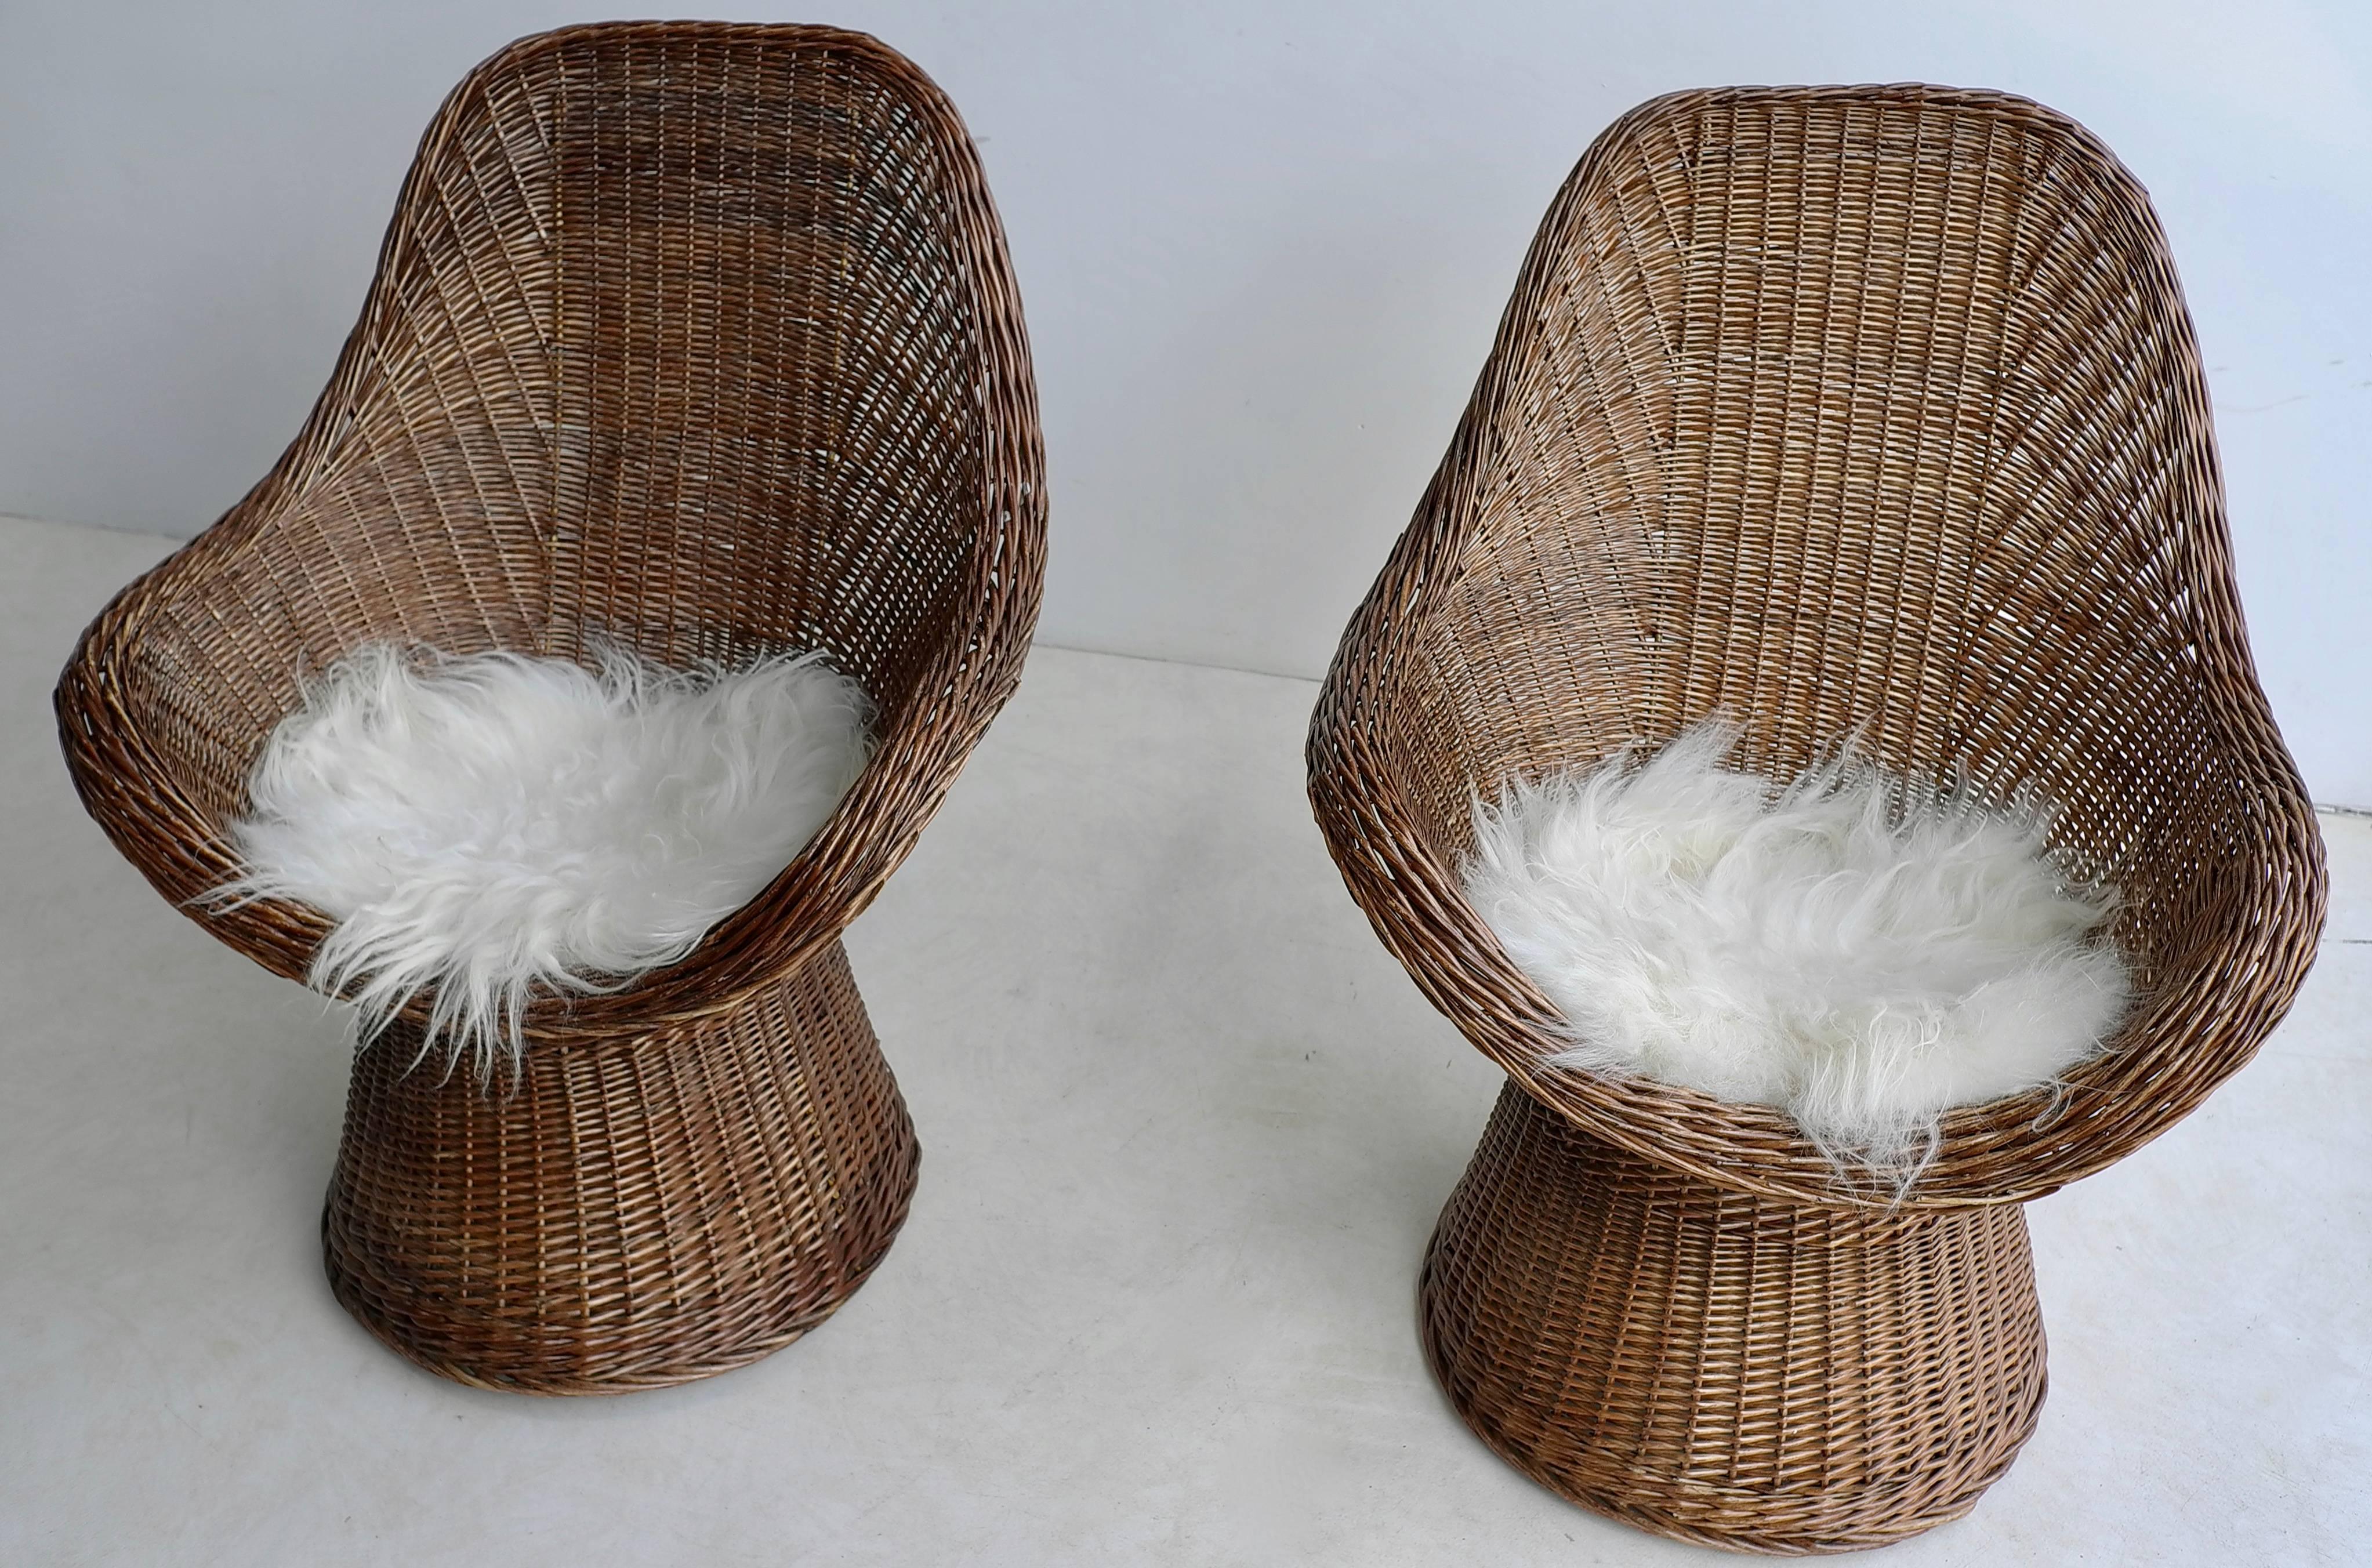 Pair of Dutch twined willow basket chairs with woollen seats, 1960s.

These chairs would look great inside an interior or outside on a porch.